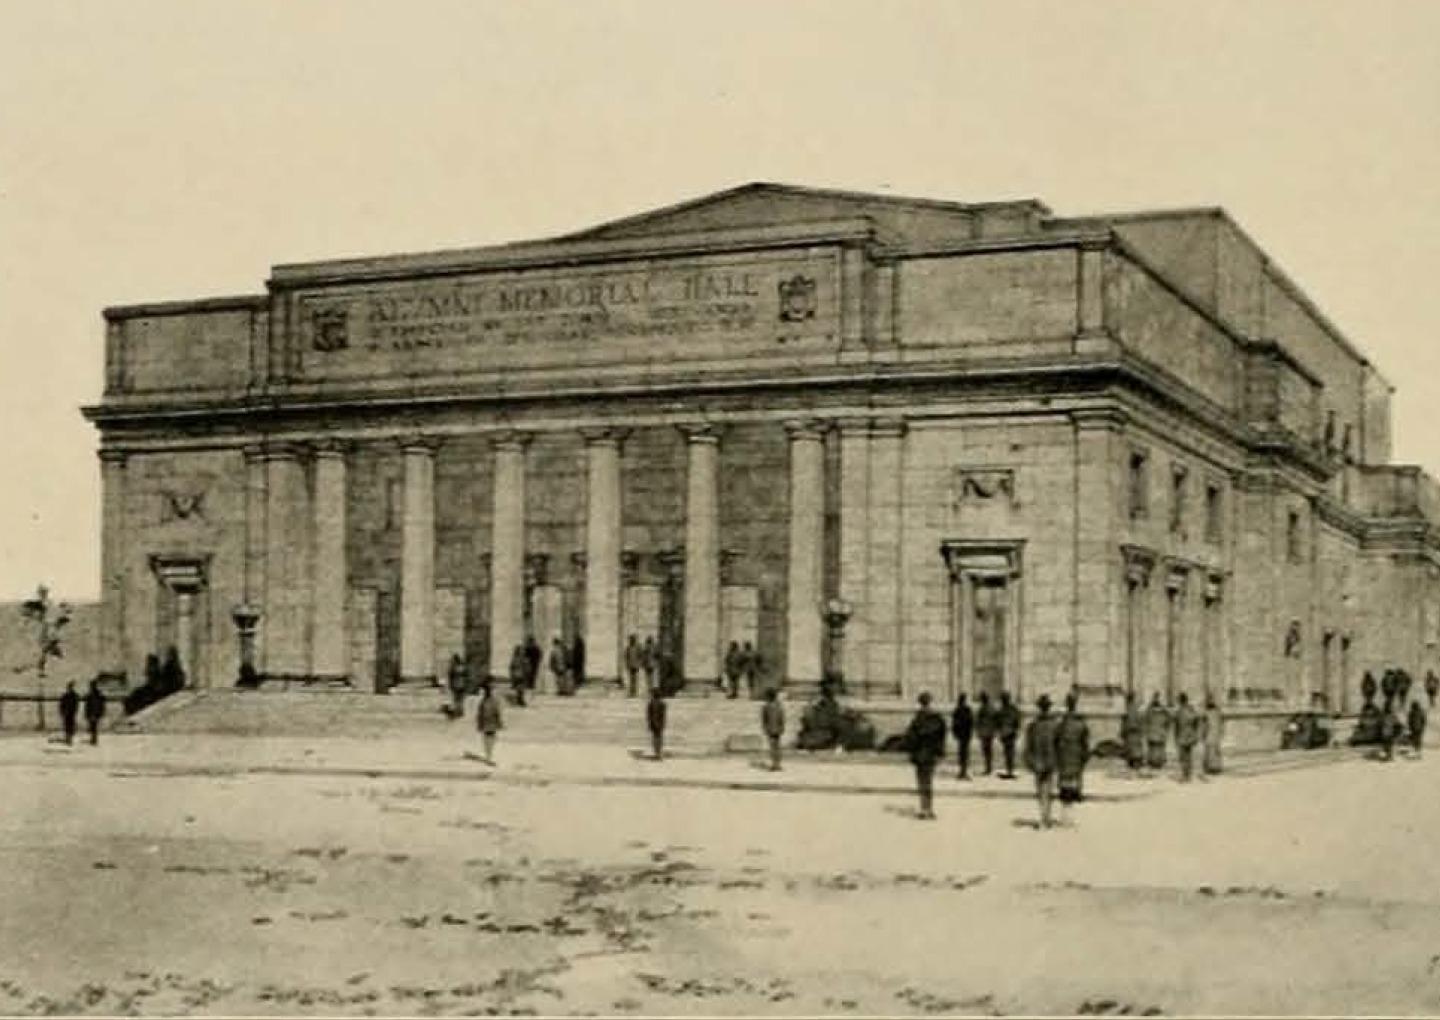 The 1923 Athena Yearbook features an architect’s drawing for what would become Templeton-Blackburn Alumni Memorial Auditorium. Image courtesy of the Mahn Center for Archives and Special Collections